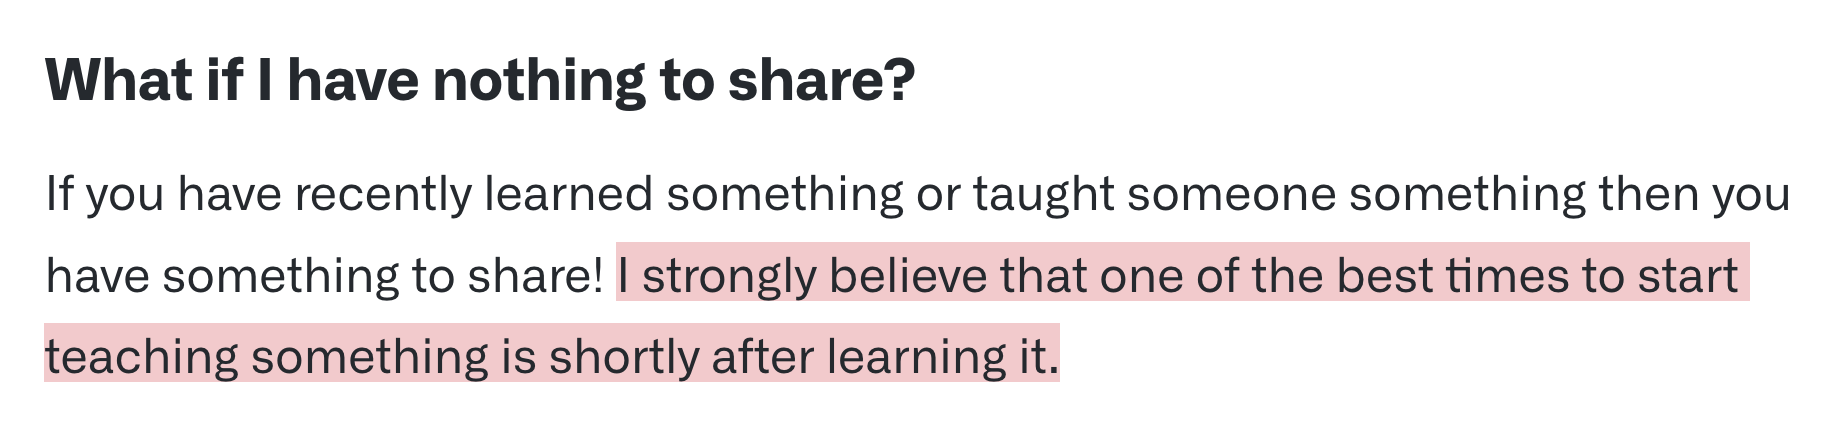 What if I have nothing to share?  If you have recently learned something or taught someone something then you have something to share! I strongly believe that one of the best times to start teaching something is shortly after learning it.